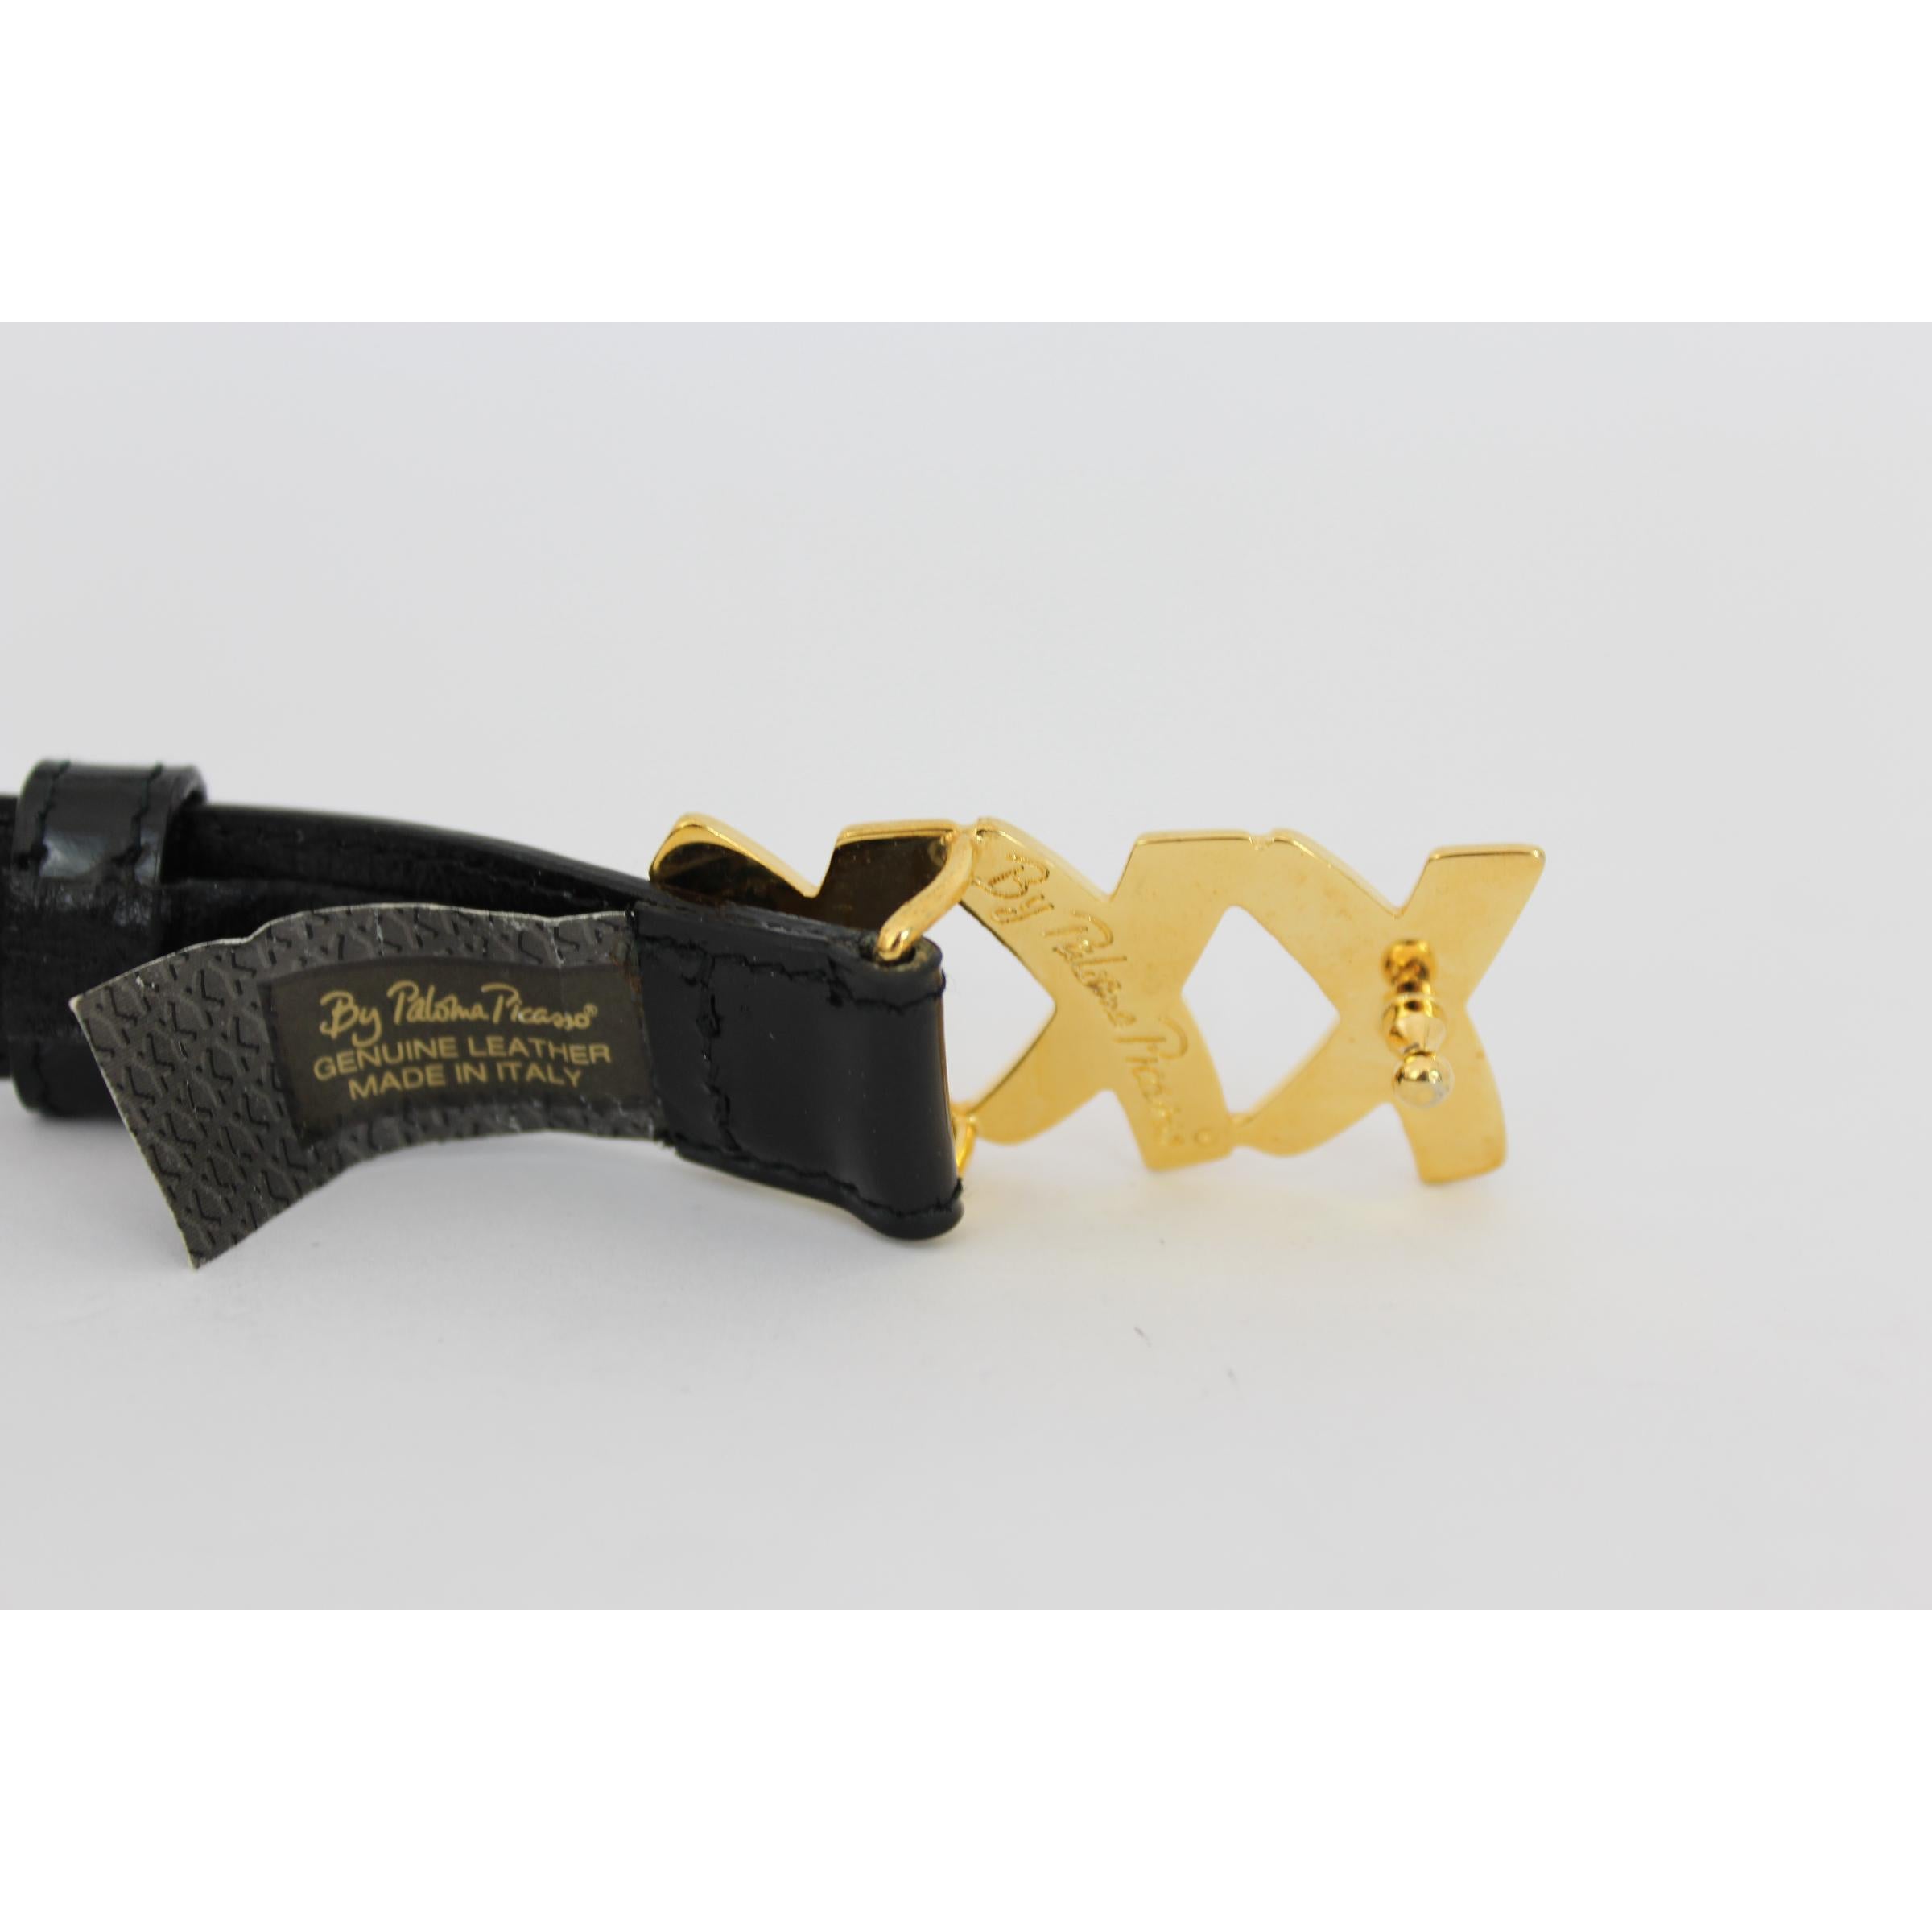 Paloma Picasso vintage women's belt. Black color, 100% calfskin. Triple X buckle, gold color. There are three adjustable notches. 80s. Made in Italy. Certificate N. BL 0861673. New without tag.

Measures: SM / 70 It 26 Us 6 Uk

Length: 80 cm
Width: